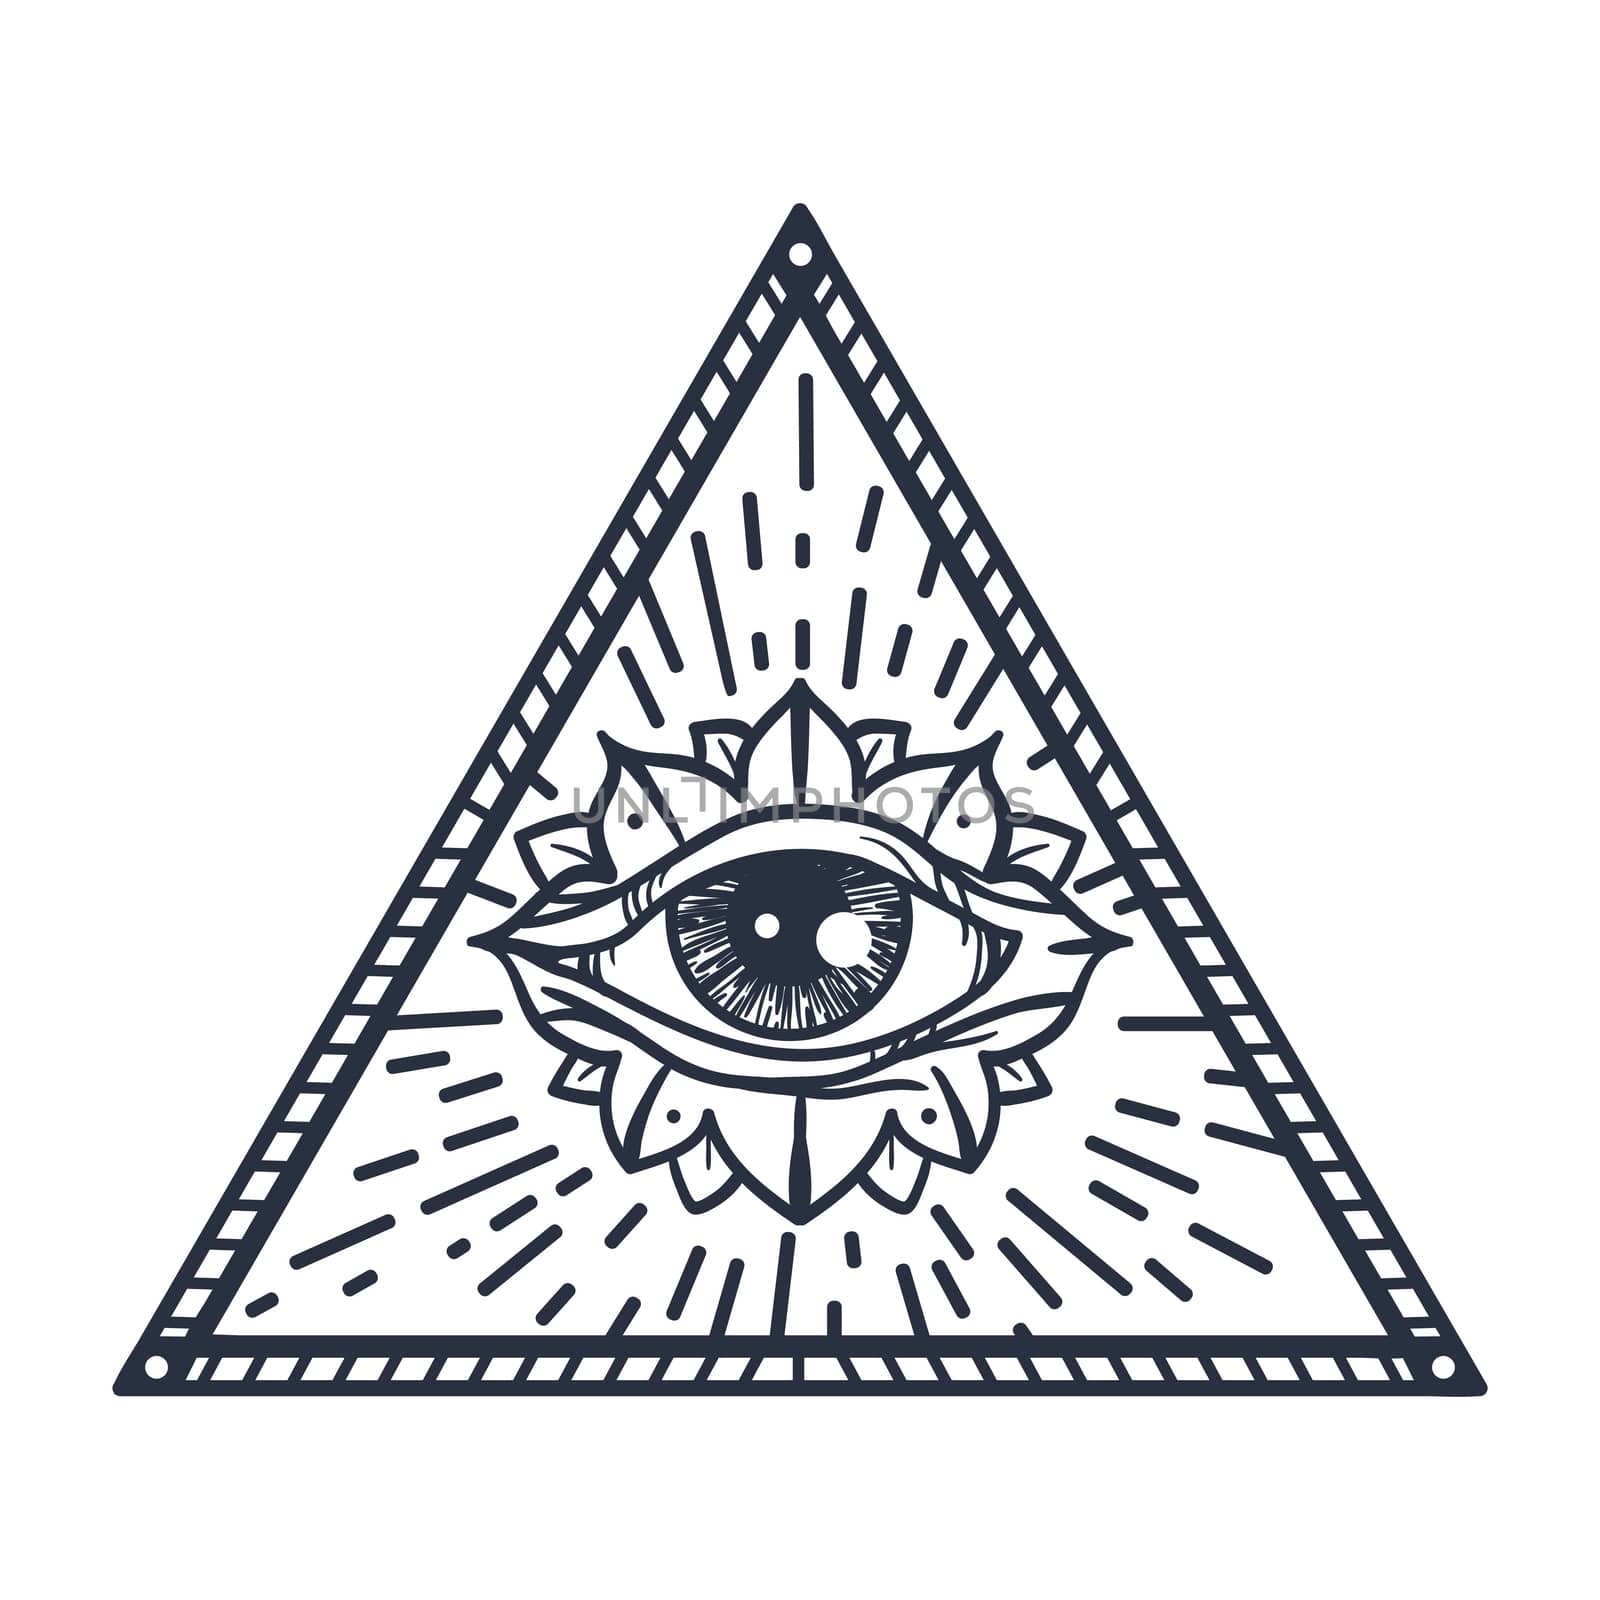 All Seeing Eye in Triangle by barsrsind